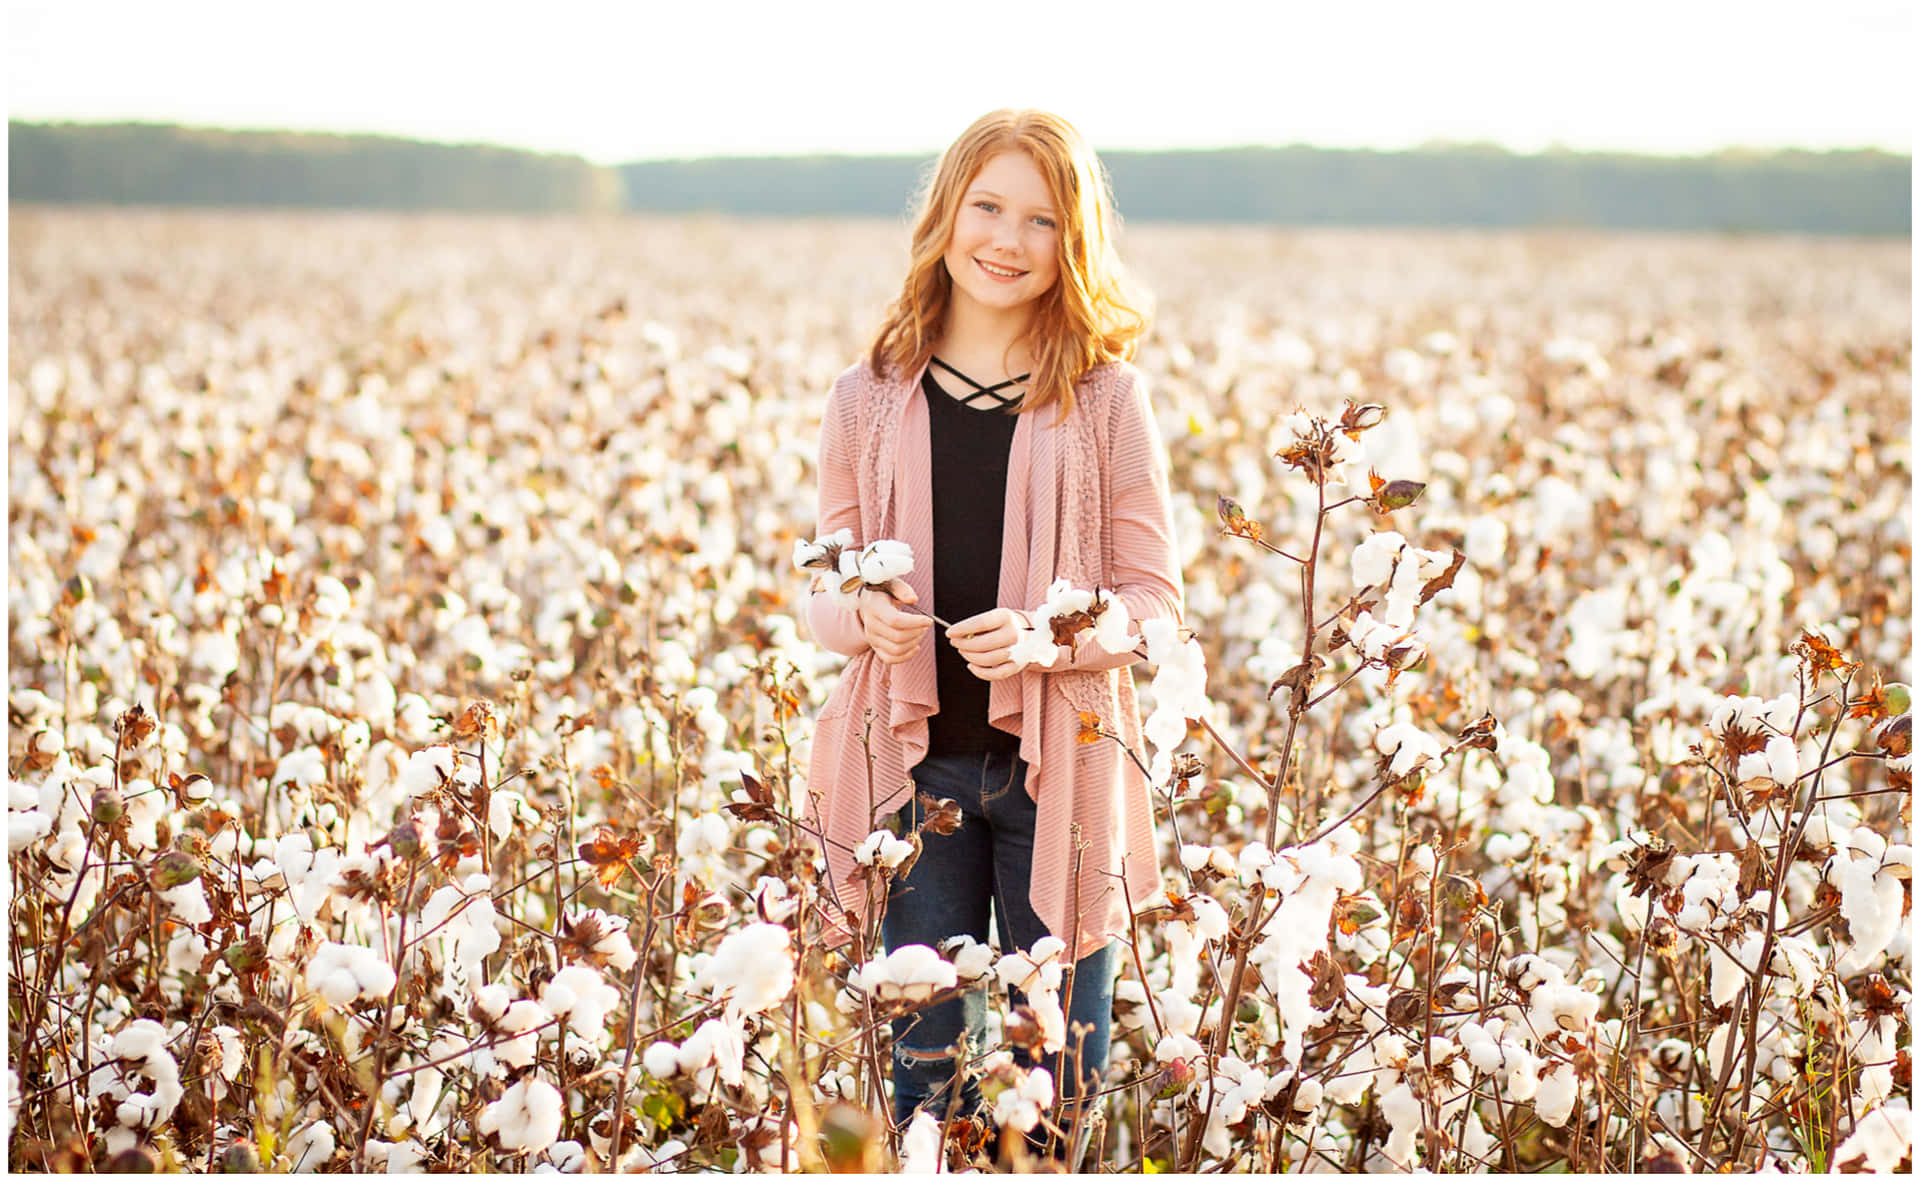 "A sea of tranquility in the plush cotton fields of North Carolina"